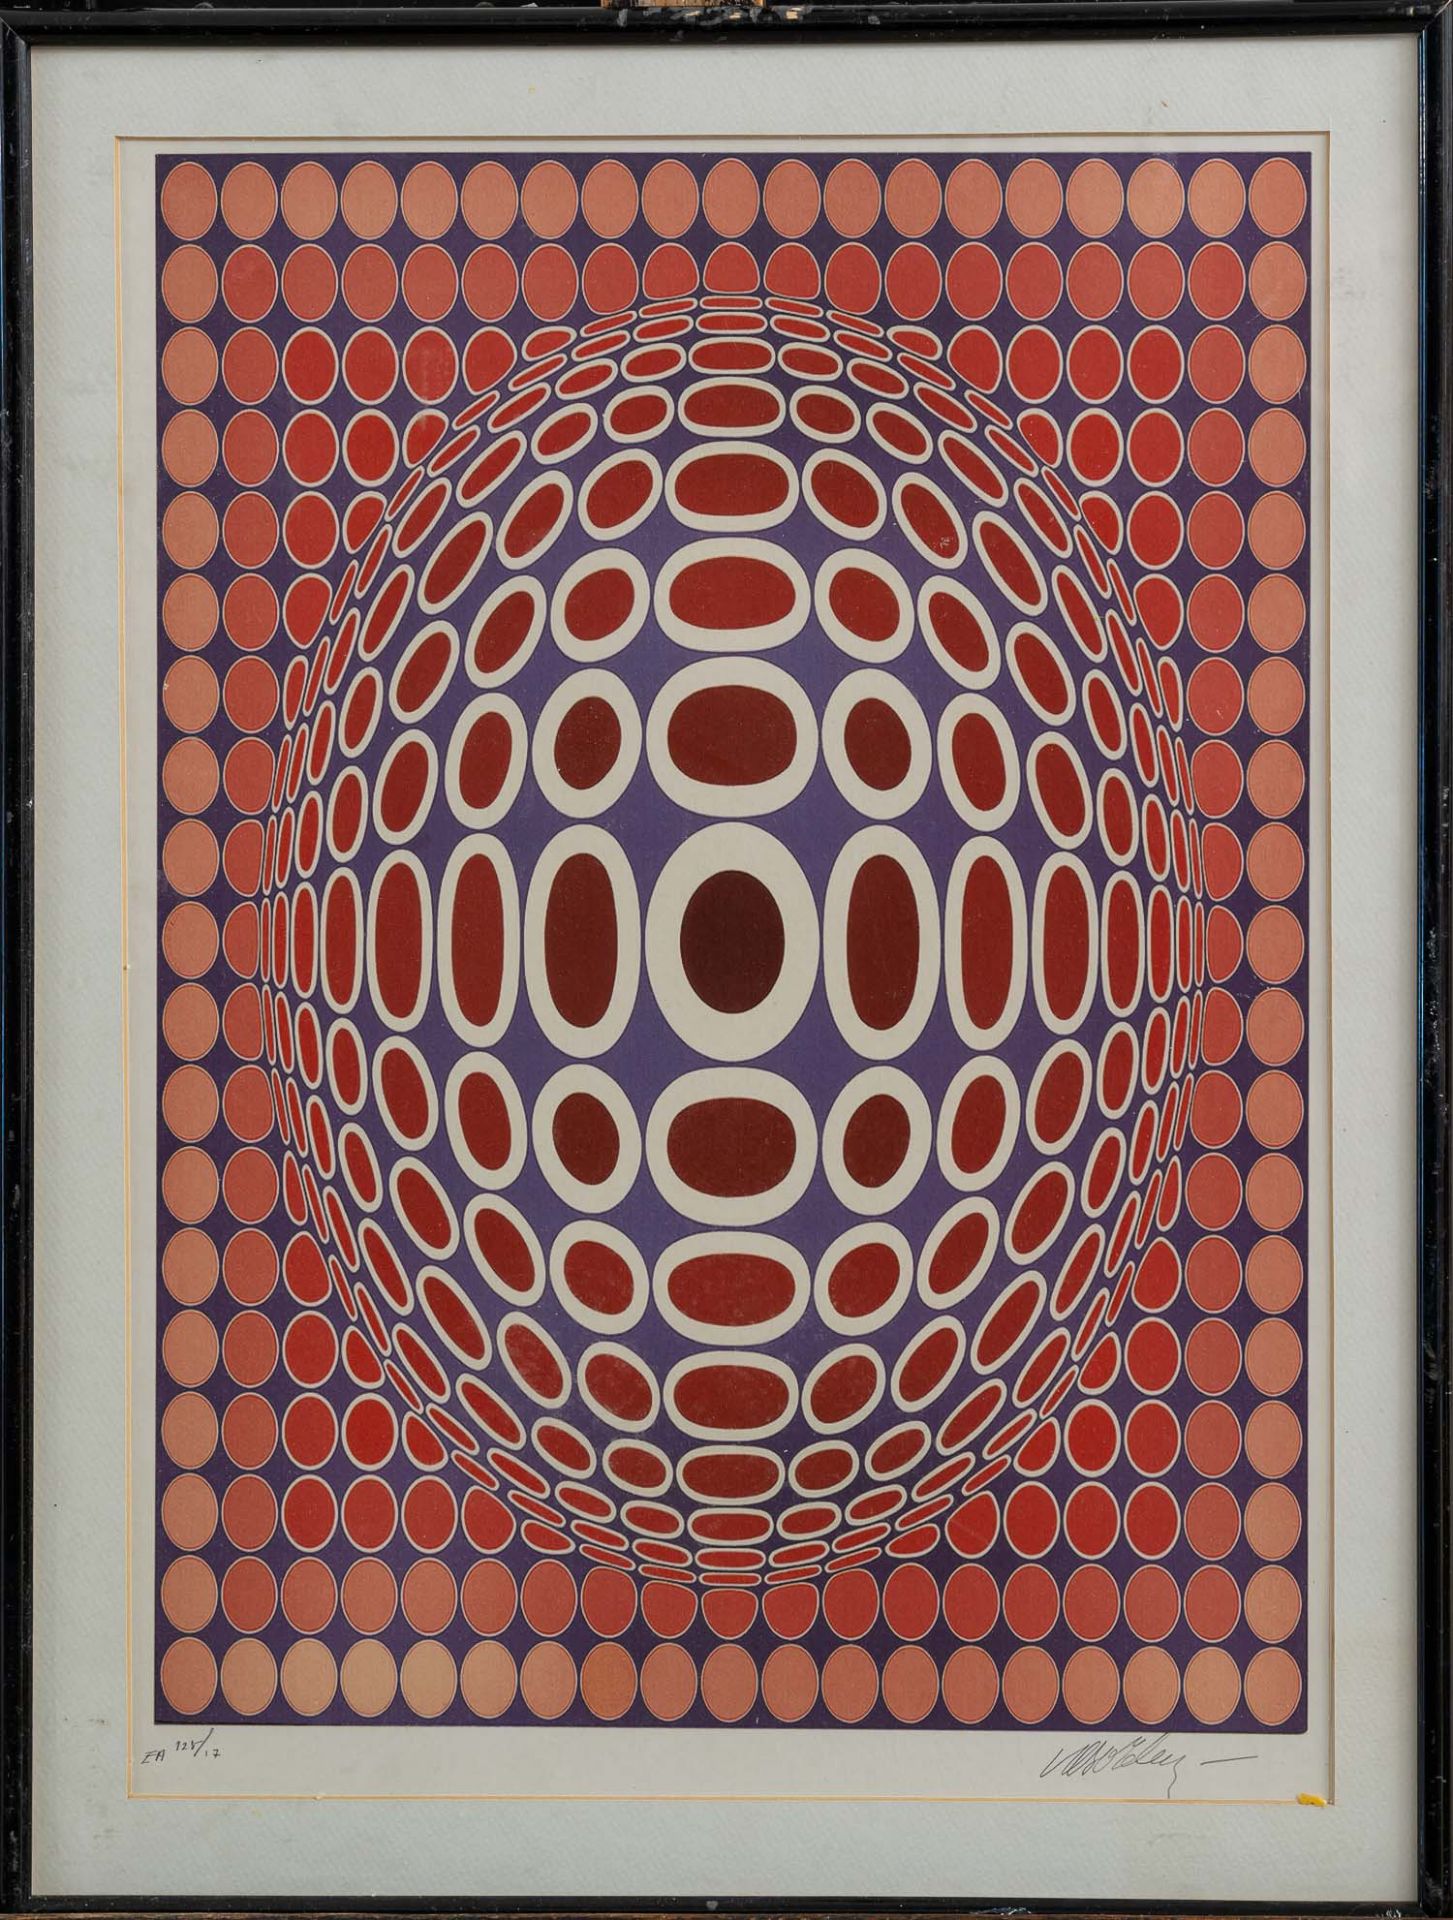 Victor Vasarely (1906-1997) – Graphic